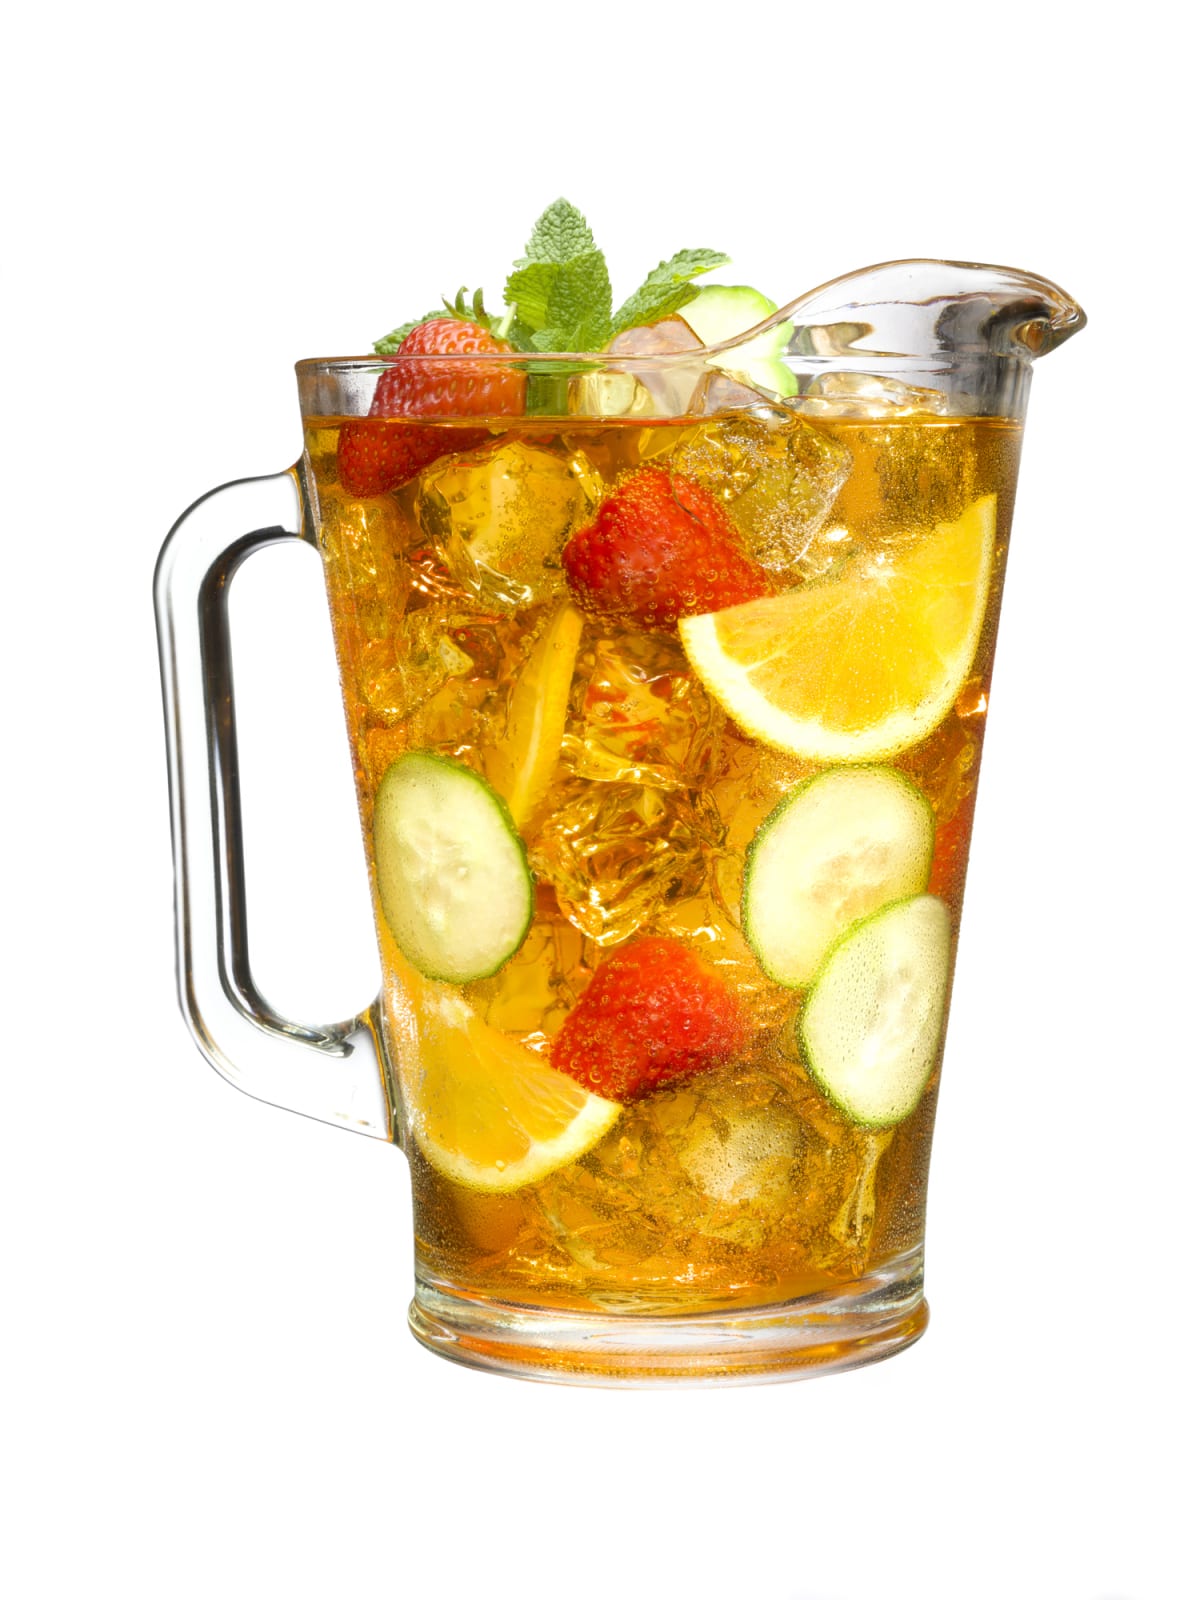 Pitcher of iced tea with cucumber, lemon, strawberry, and mint